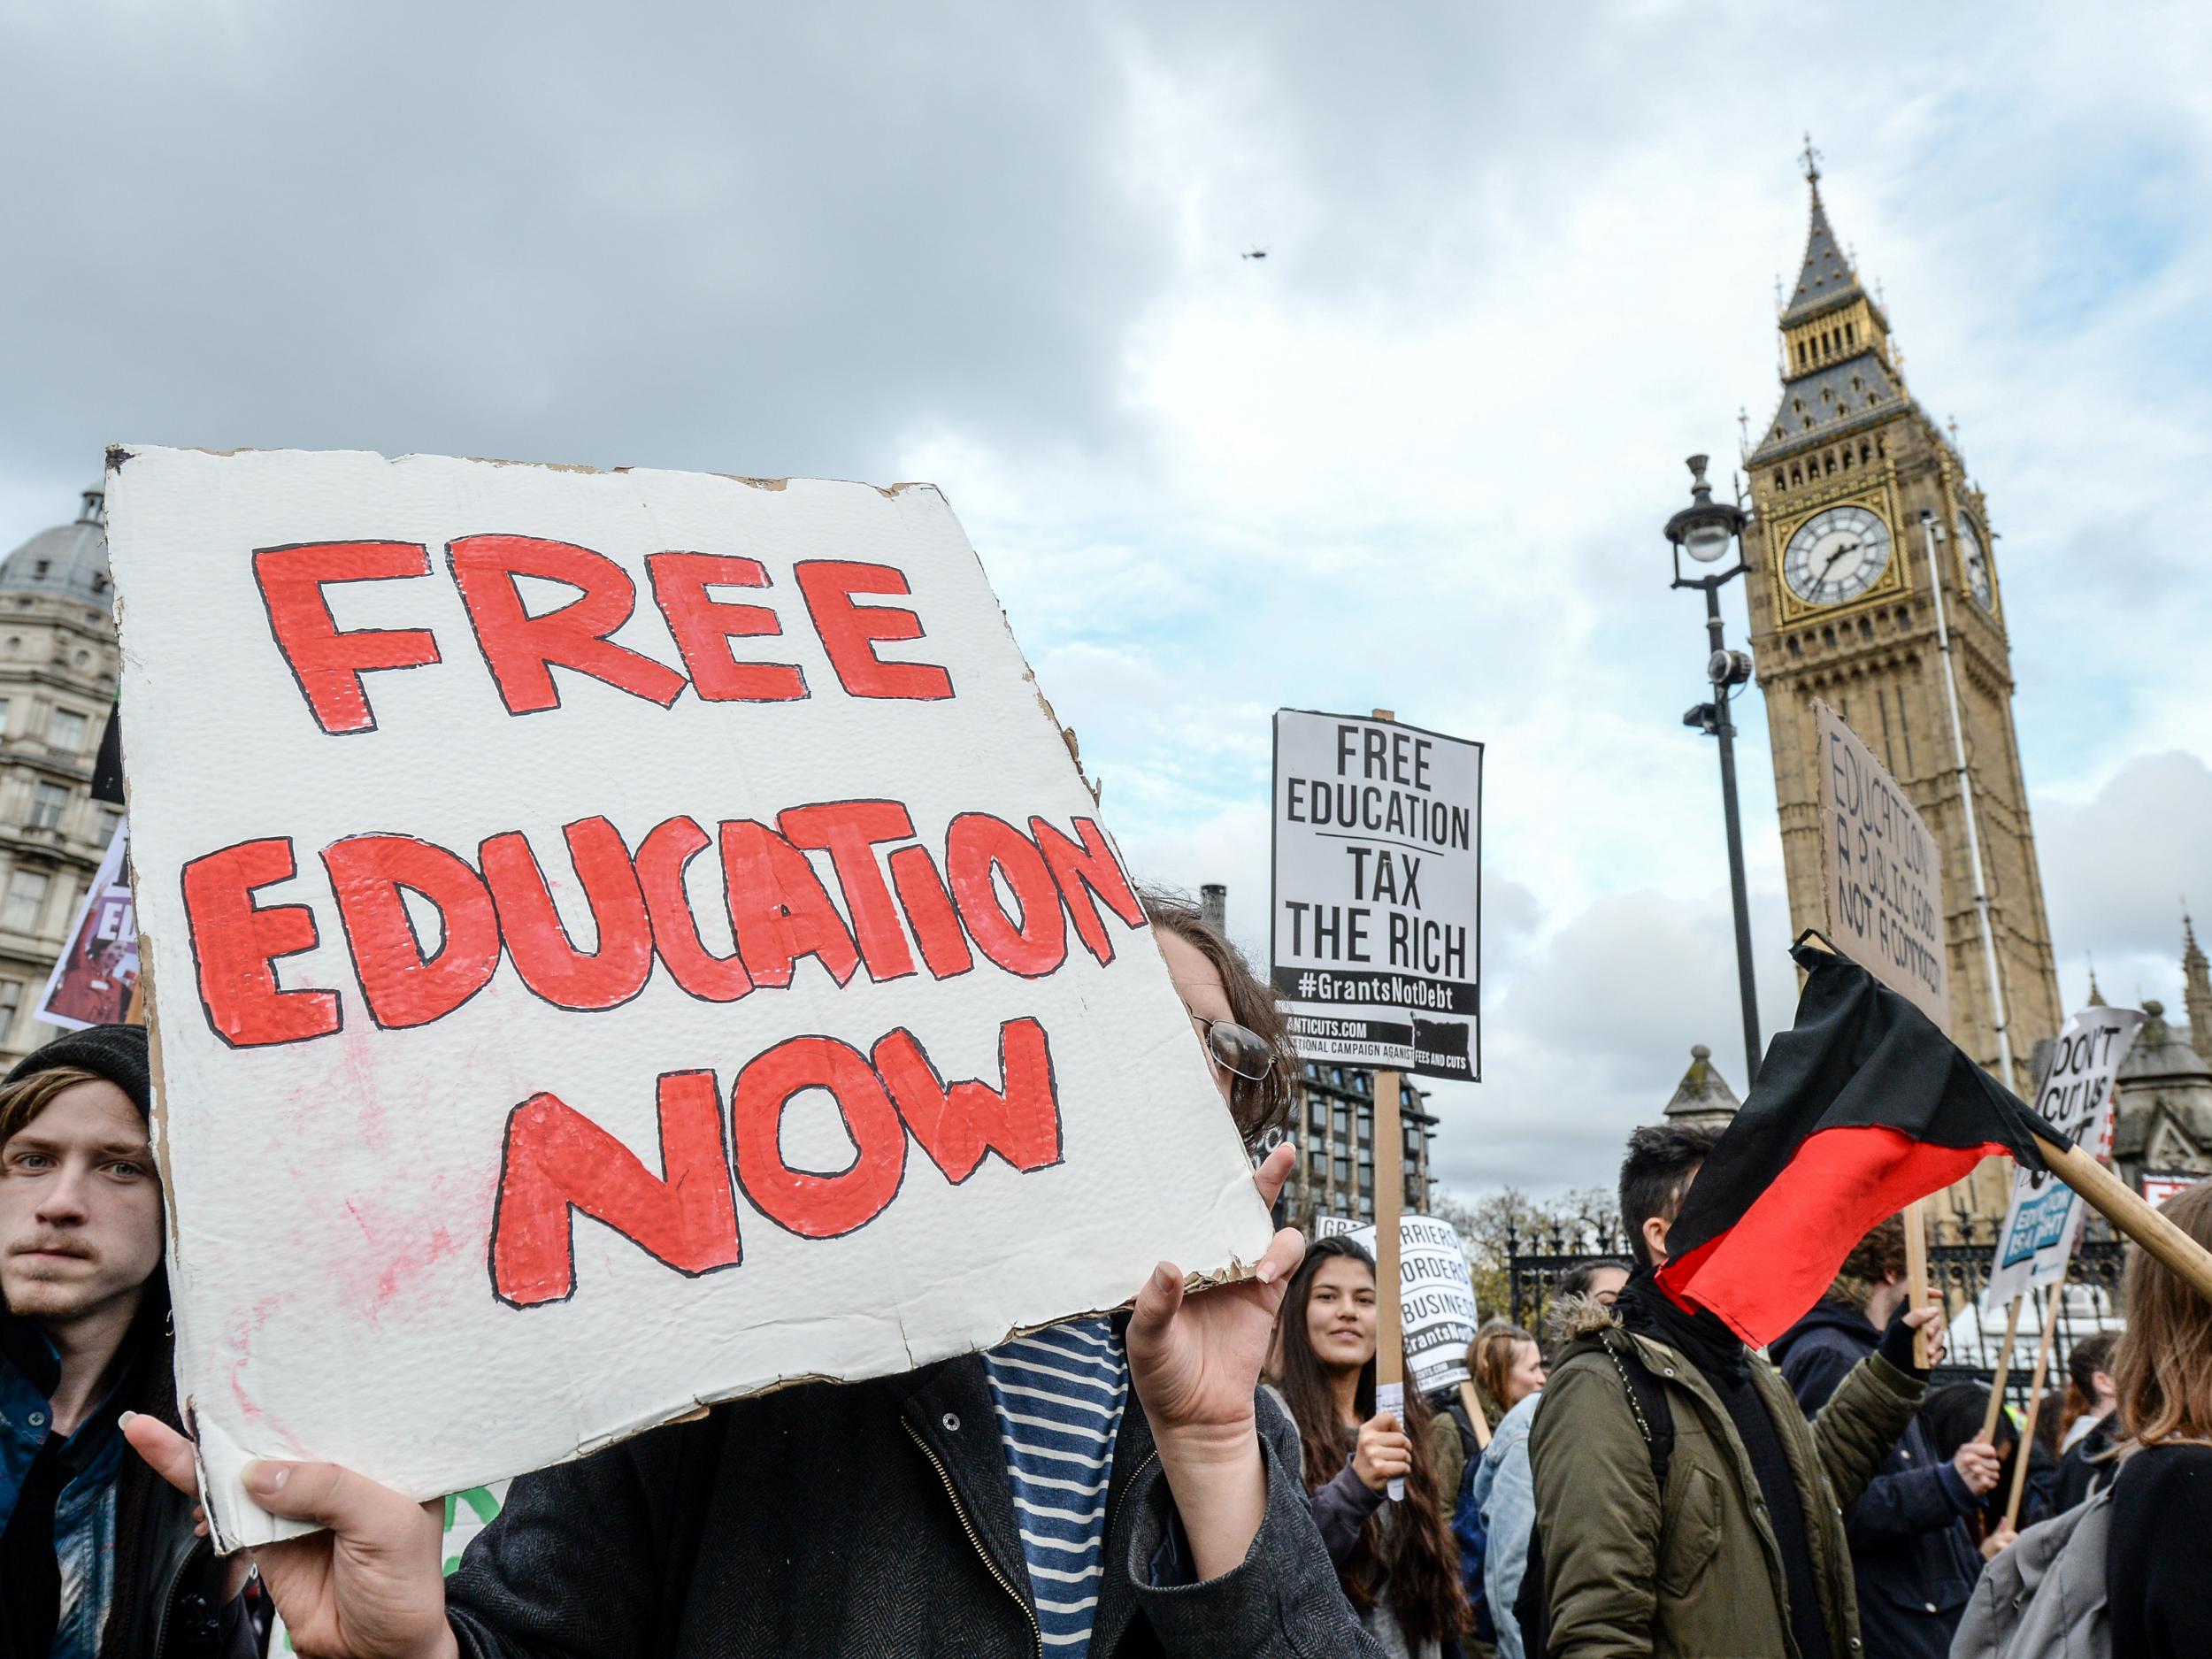 Students march during a demonstration against education cuts